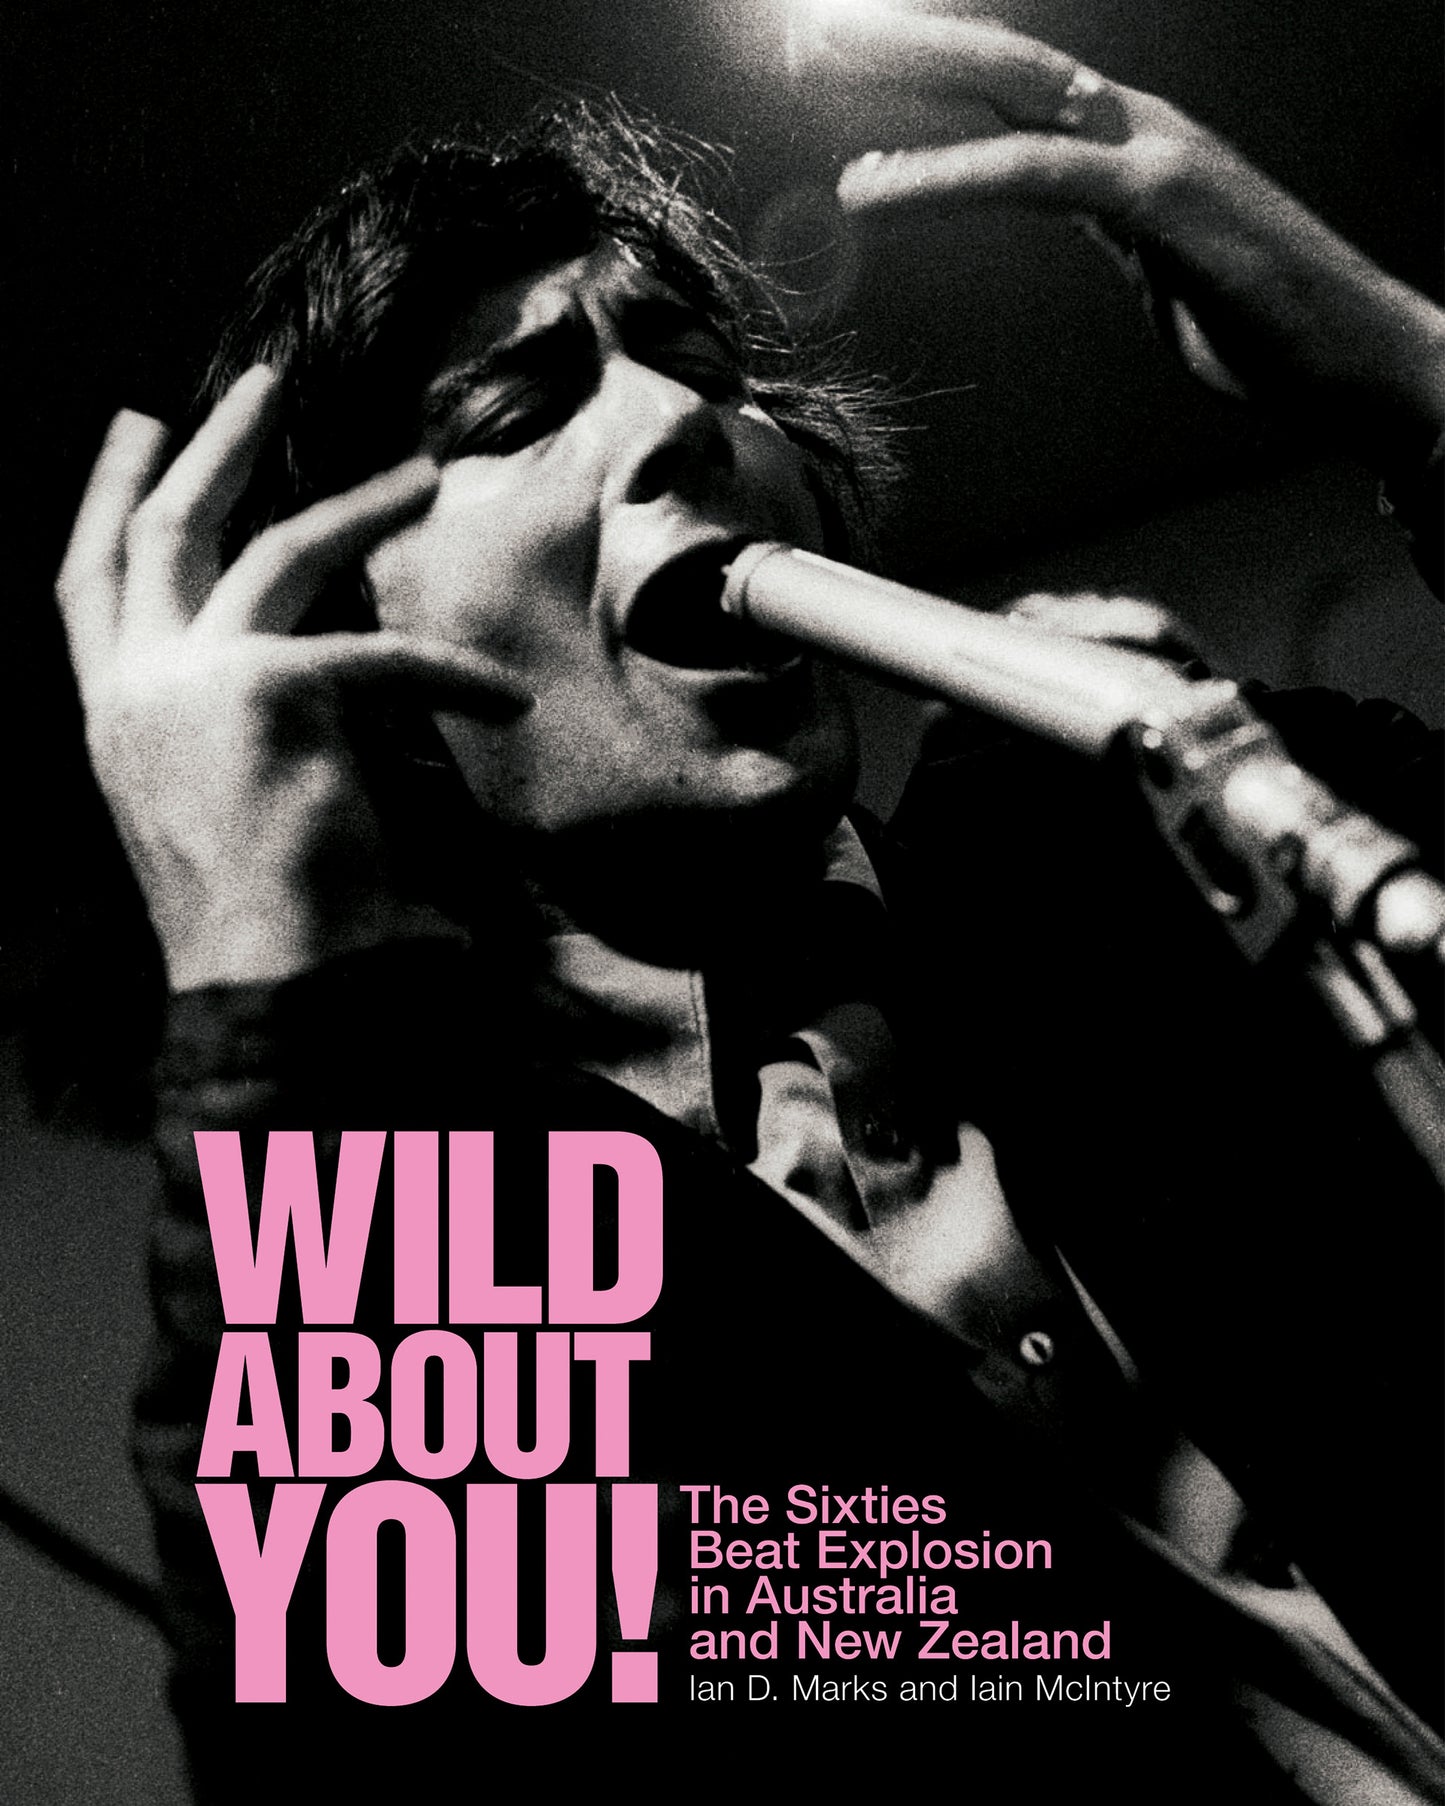 IAN D MARKS & IAIN MCINTYRE - WILD ABOUT YOU! THE SIXTIES BEAT EXPLOSION IN AUSTRALIA & NEW ZEALAND BOOK